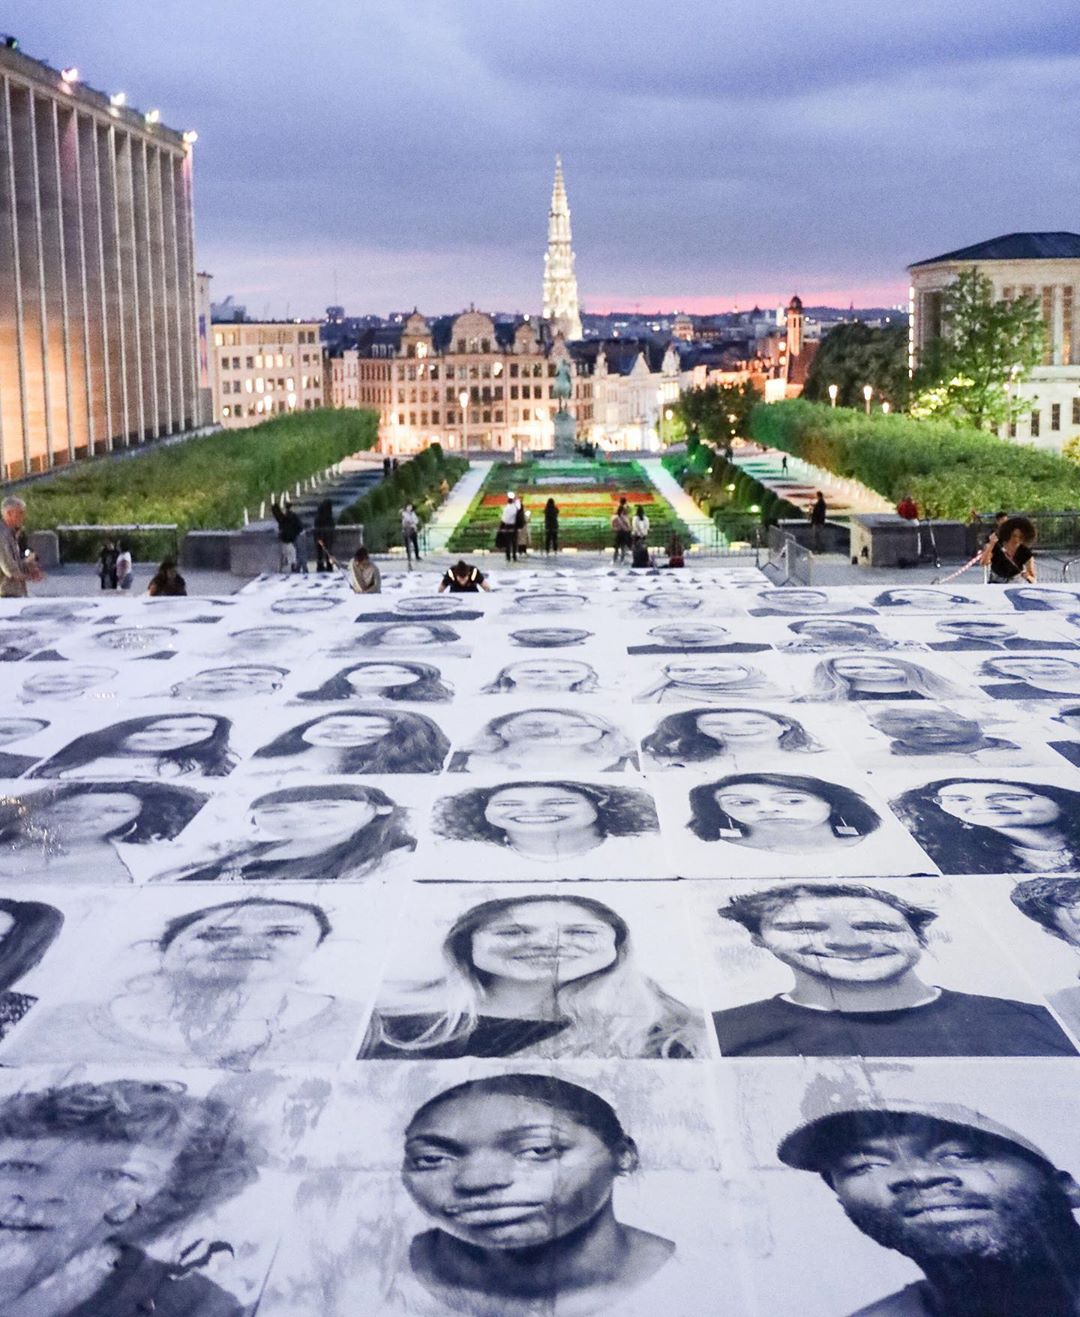 The Inside Out Project x 50 Shades of Racism, in Brussels, Belgium. Images courtesy of JR's Instagram